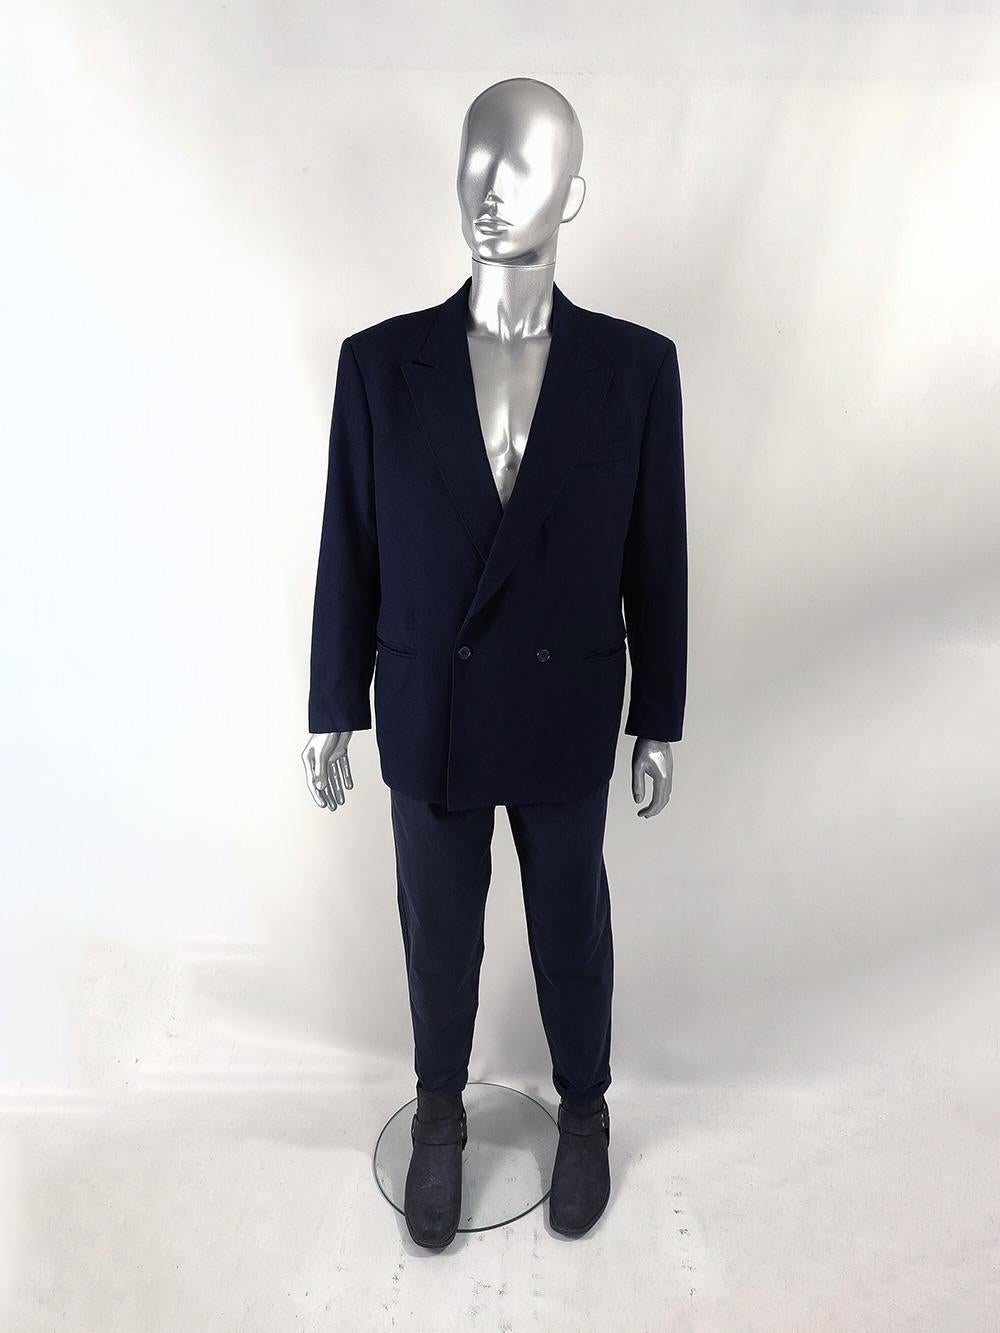 An excellent vintage mens blazer from the 80s by Italian tailor, Umberto Lambuccini of Milan. Made in Italy, from a navy blue pure new wool fabric. This jacket has a 1940s inspiration with its bold shoulders, single set of double breasted buttons